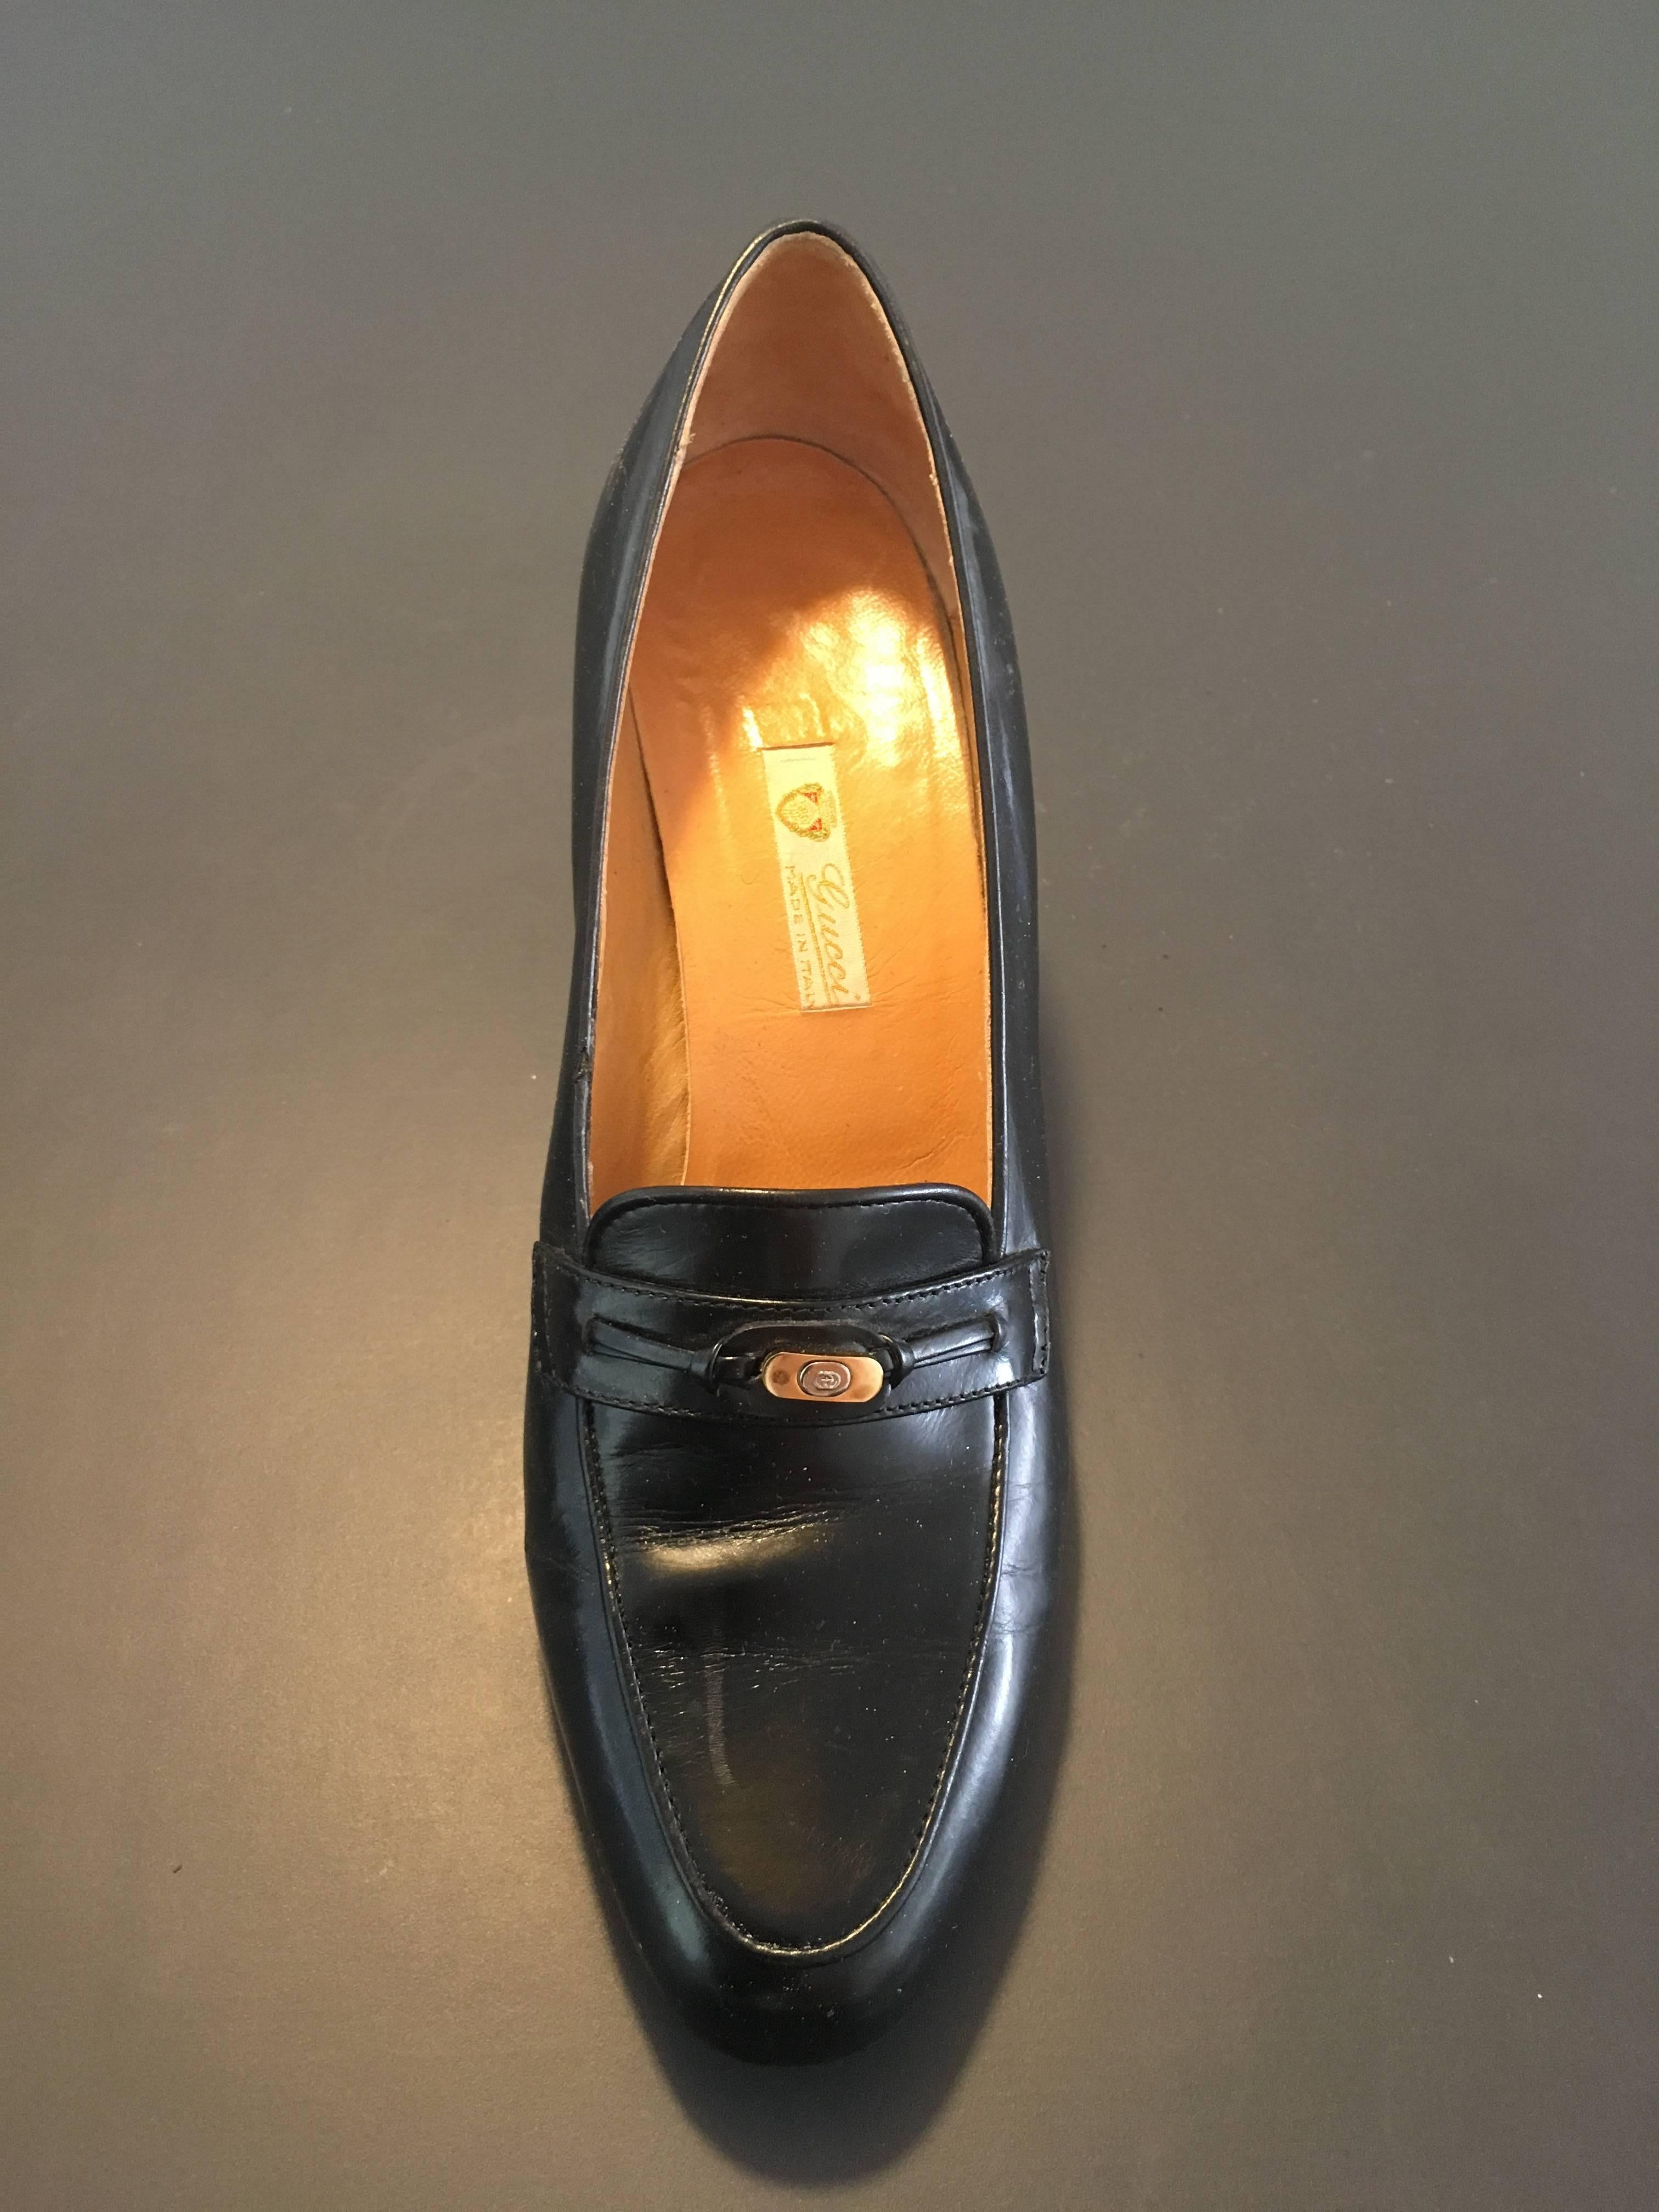 Gucci Black Leather Heeled Loafers Size 37.1/2 B. For Sale 2